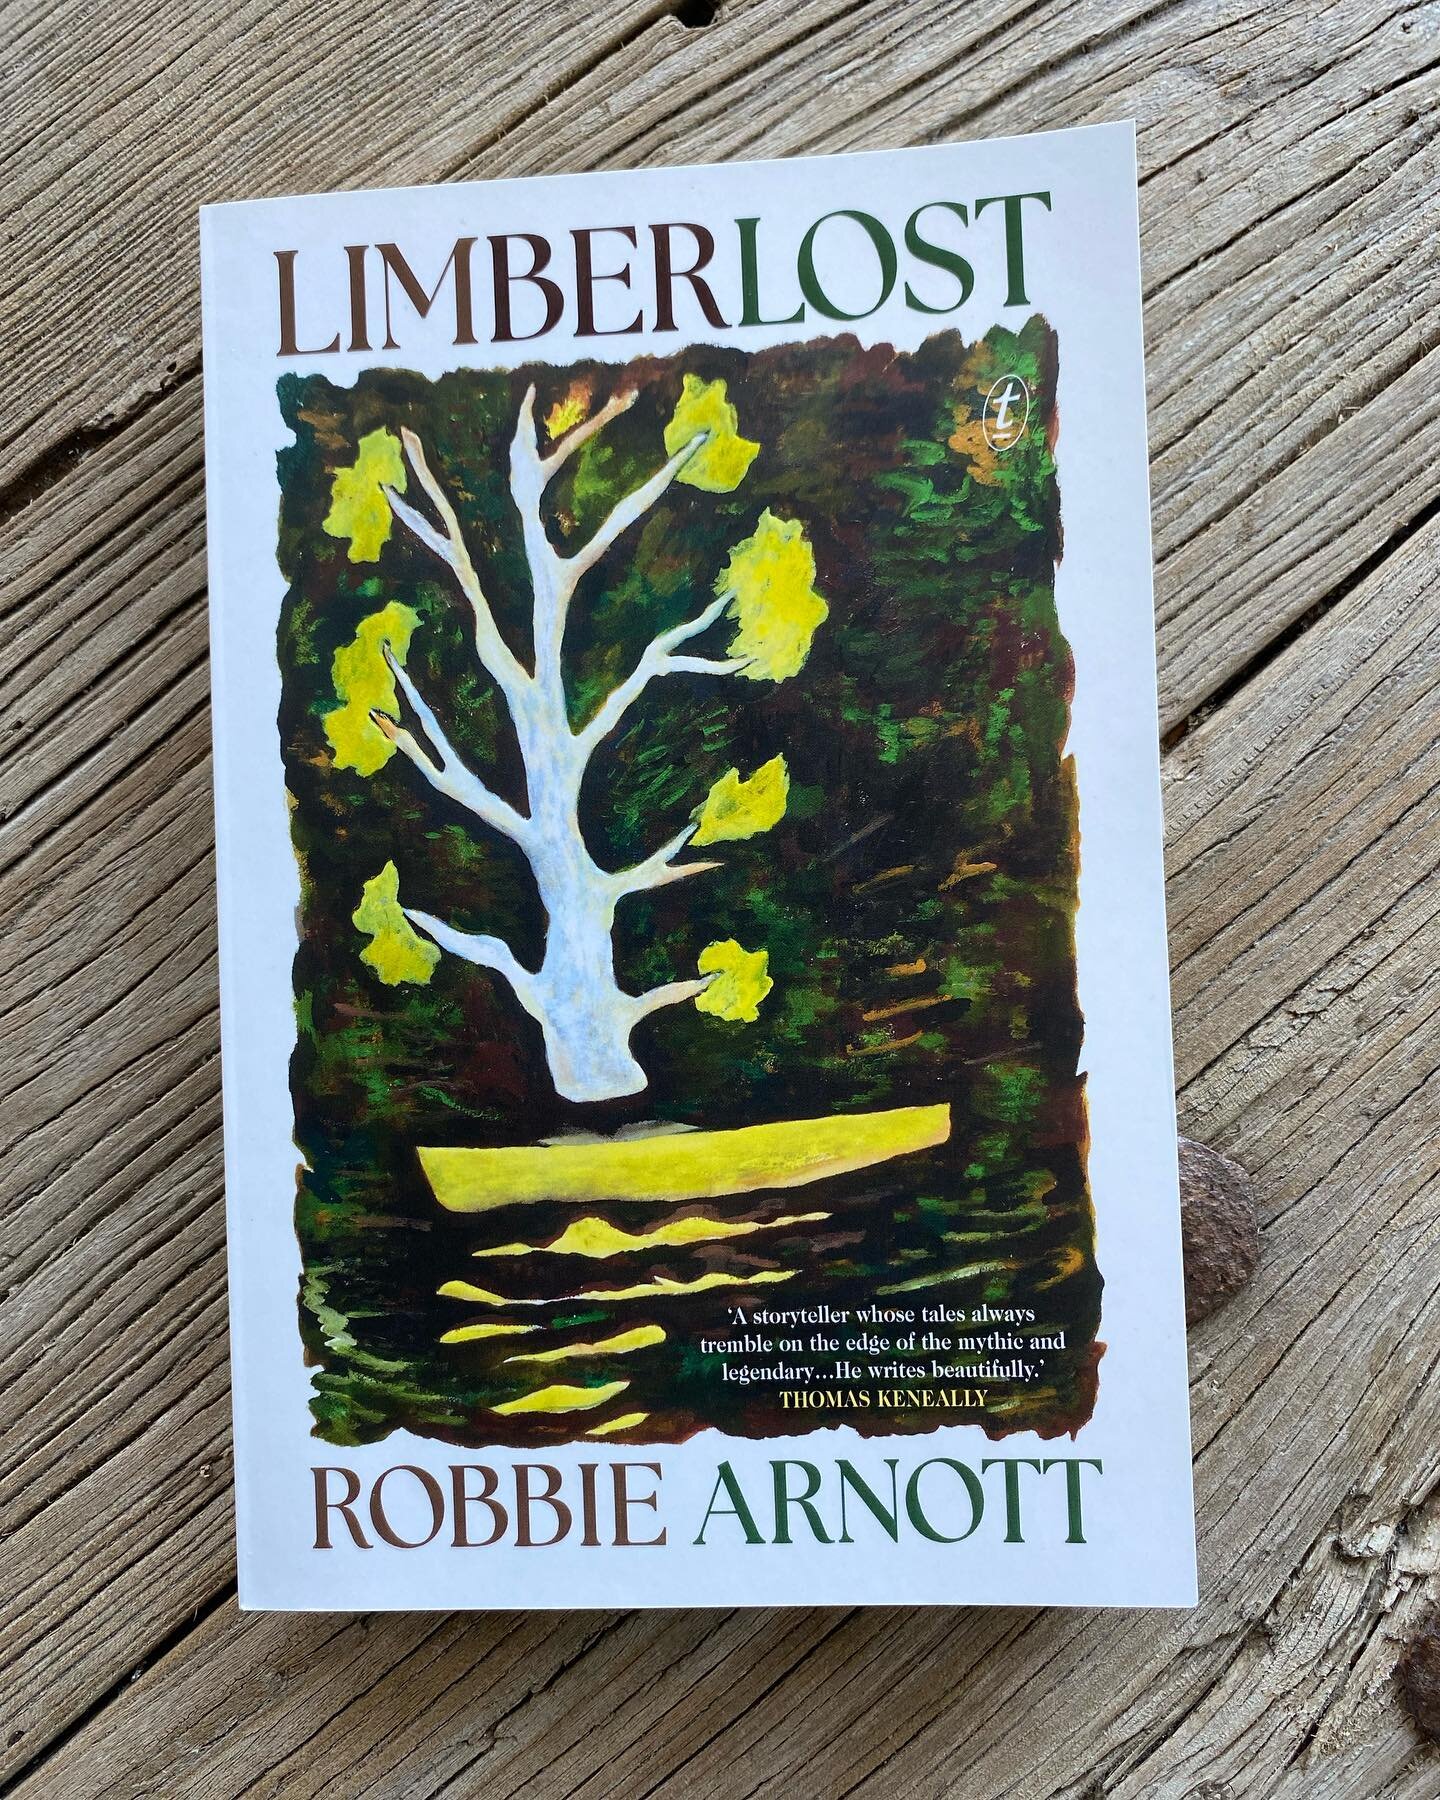 I loved this coming-of-age story by @robbie_gc_arnott. Told from the viewpoint of 15-year-old Ned, a somewhat solitary lad, growing up during the uncertainties, loss and trauma of the Second World War. He lives on an orchid in Tasmania with his fathe